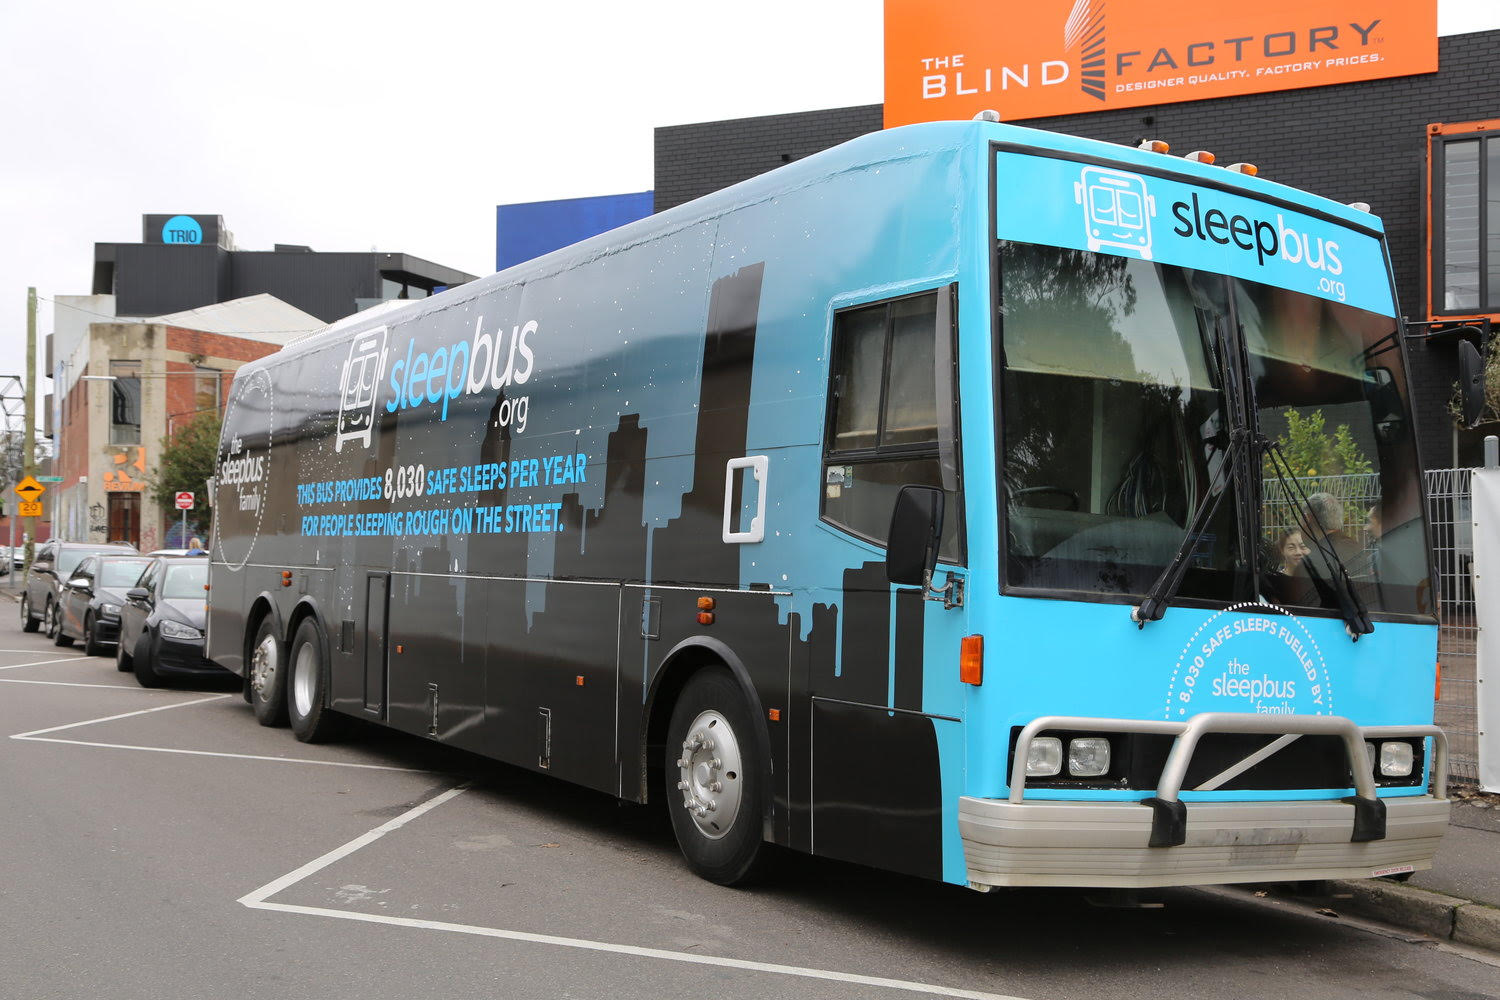 sleepbus has a very positive and innovative brand to help raise awareness and resonate with audiences  (Image: supplied)